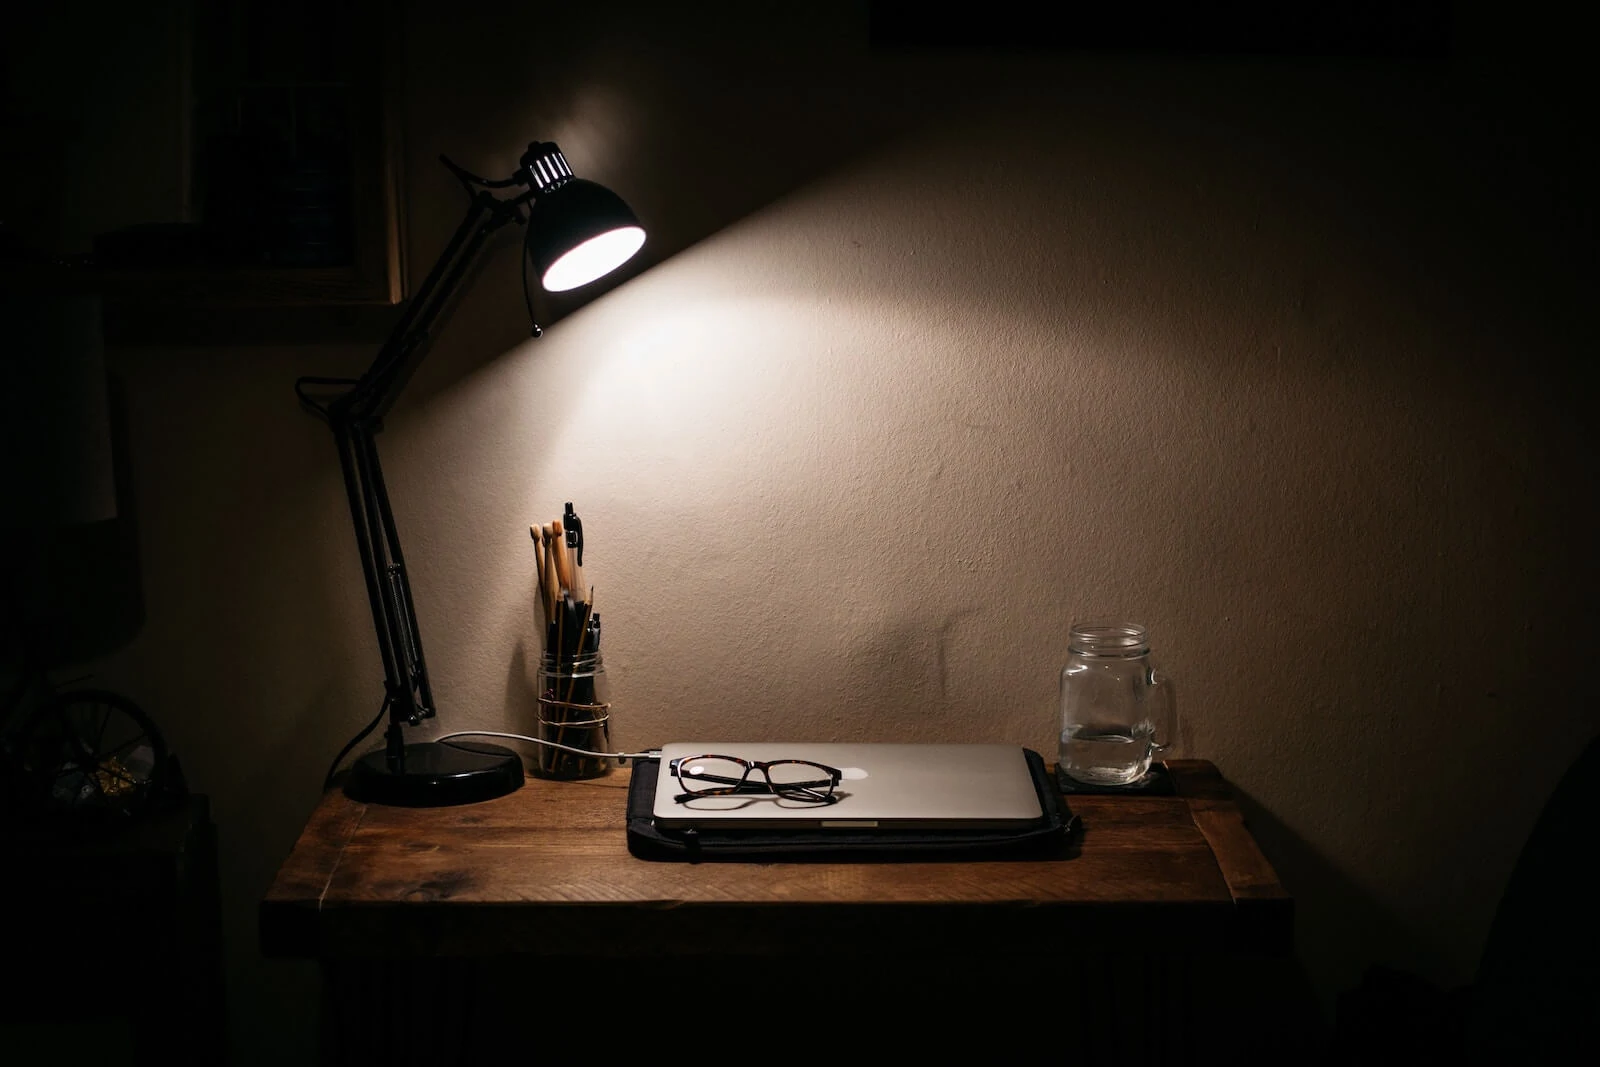 Desk with light on while working late